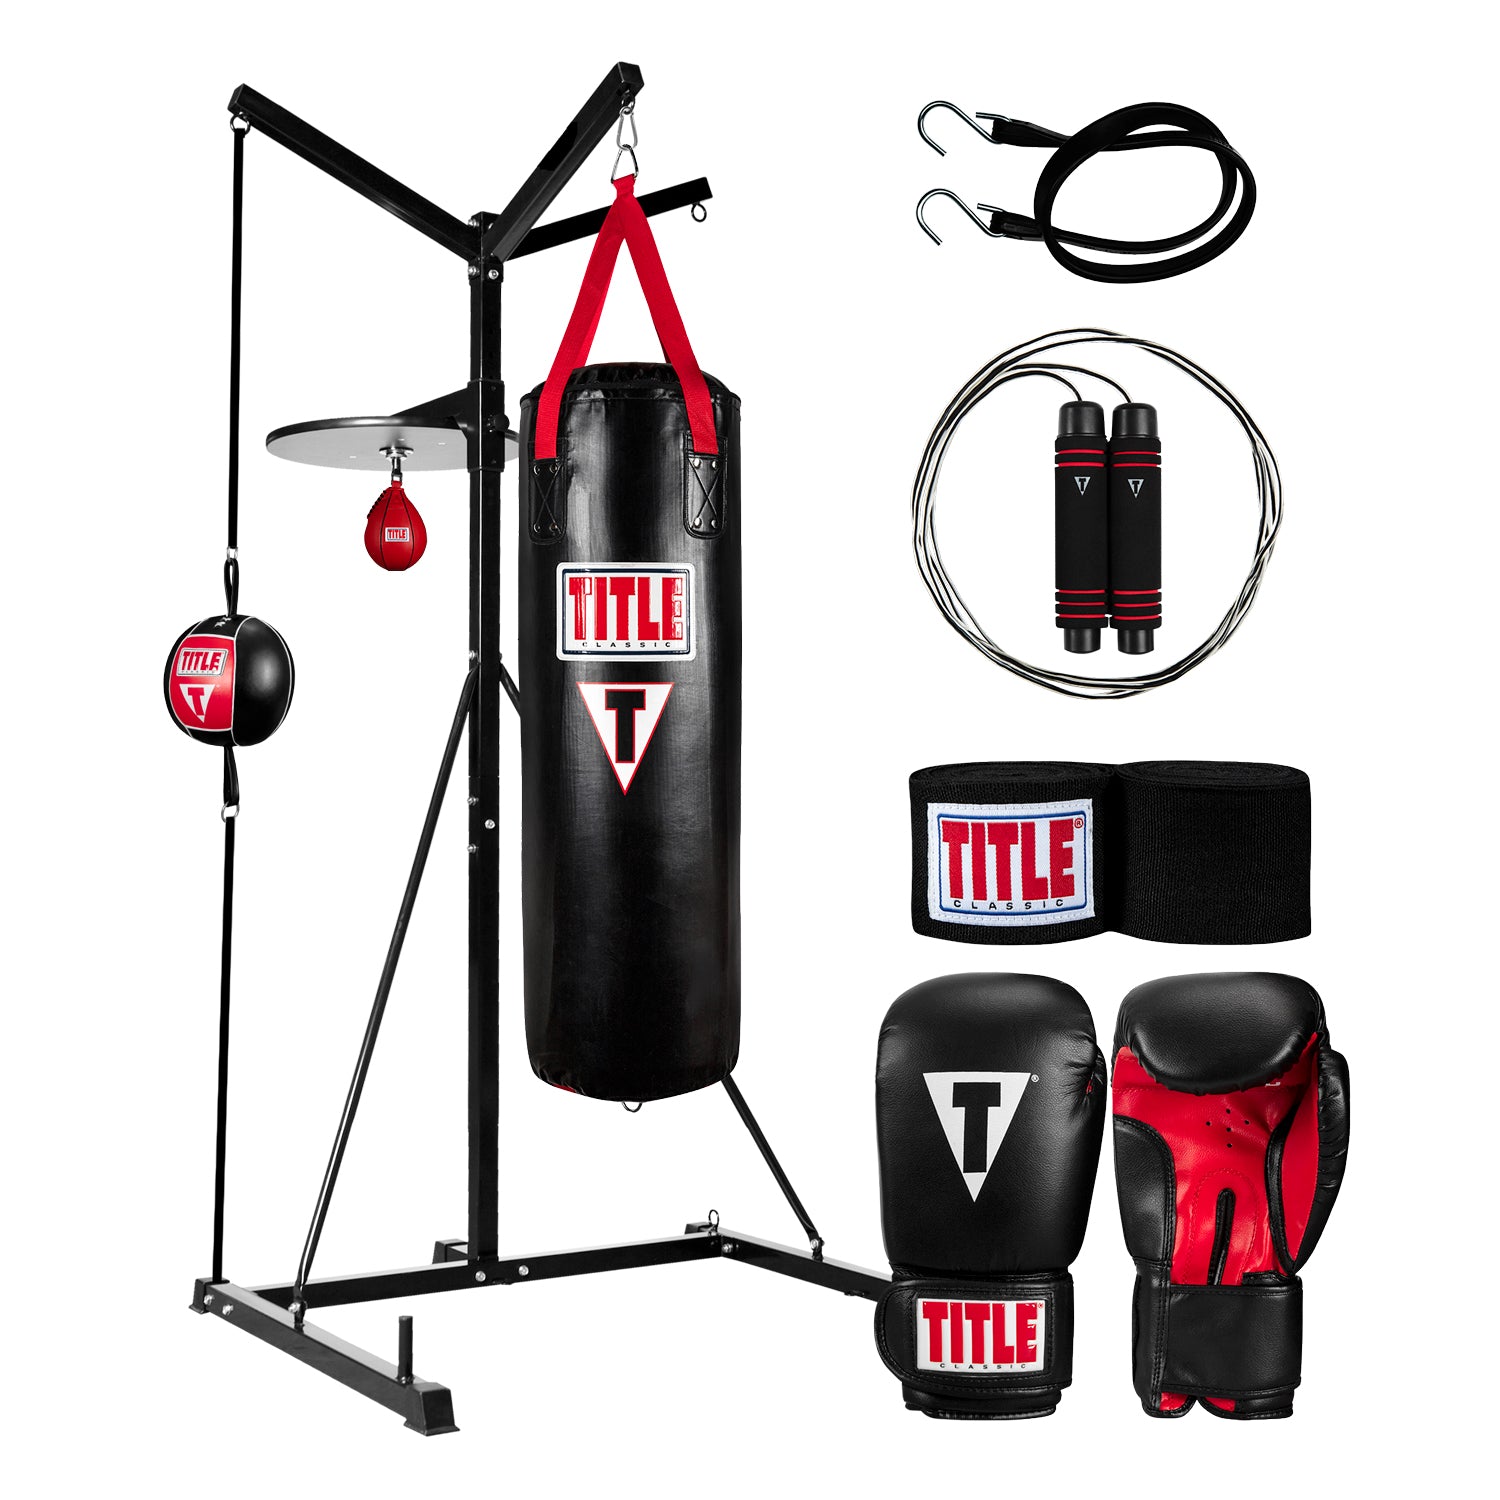 TITLE Boxing 4-Score Punching Bag Stand (Without Punching Bags)